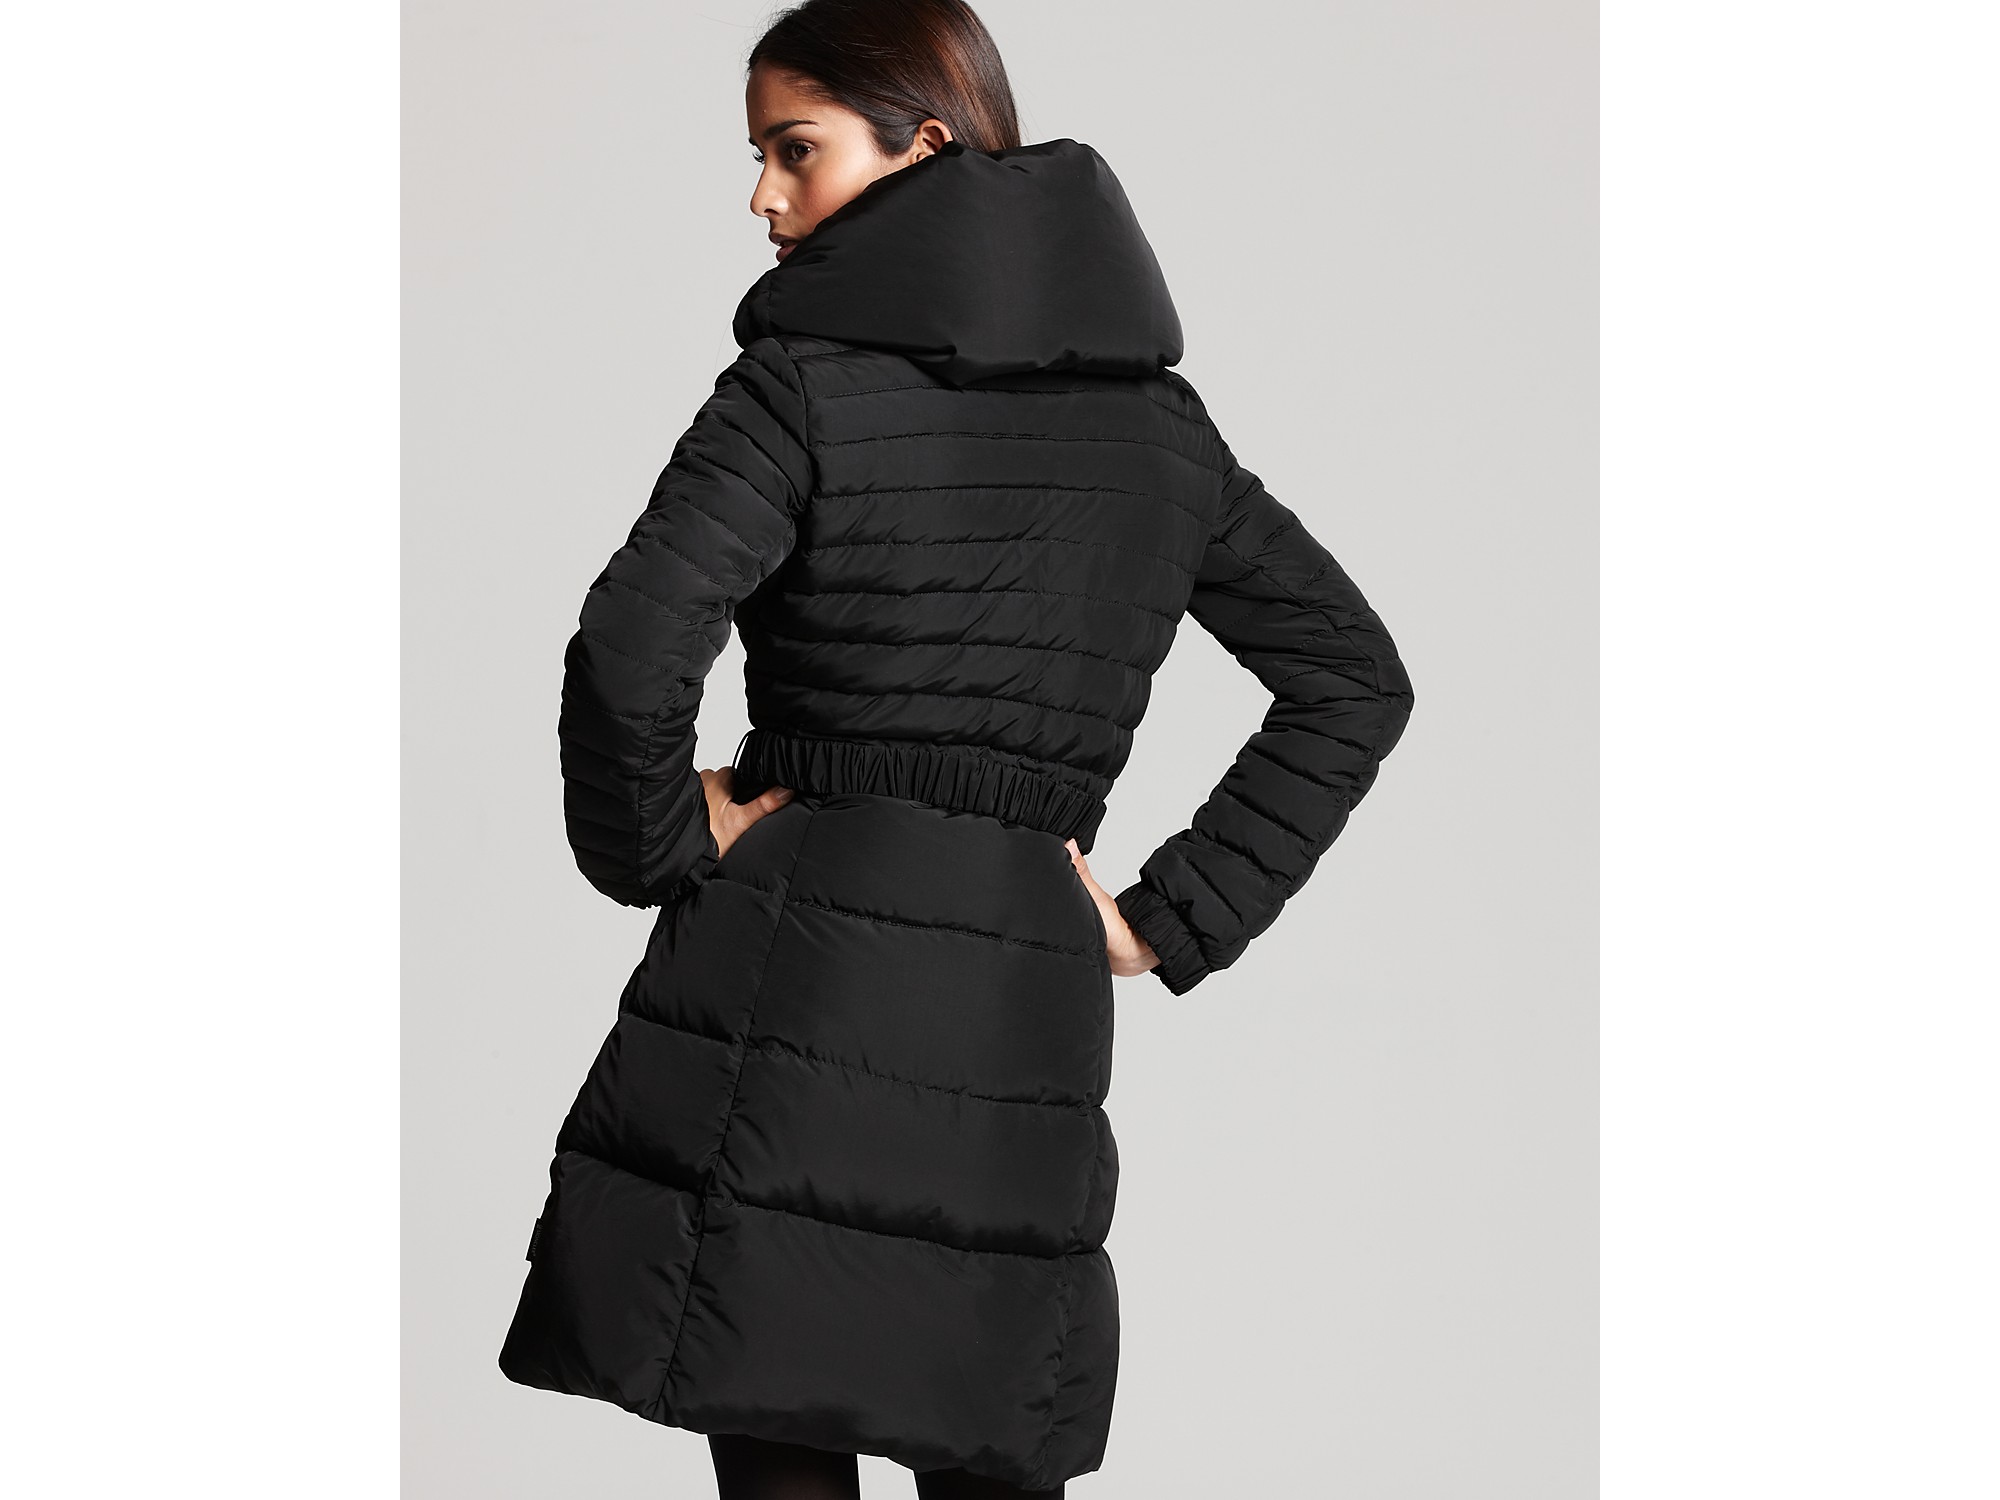 Moncler Belted Puffer Coat in Black - Lyst